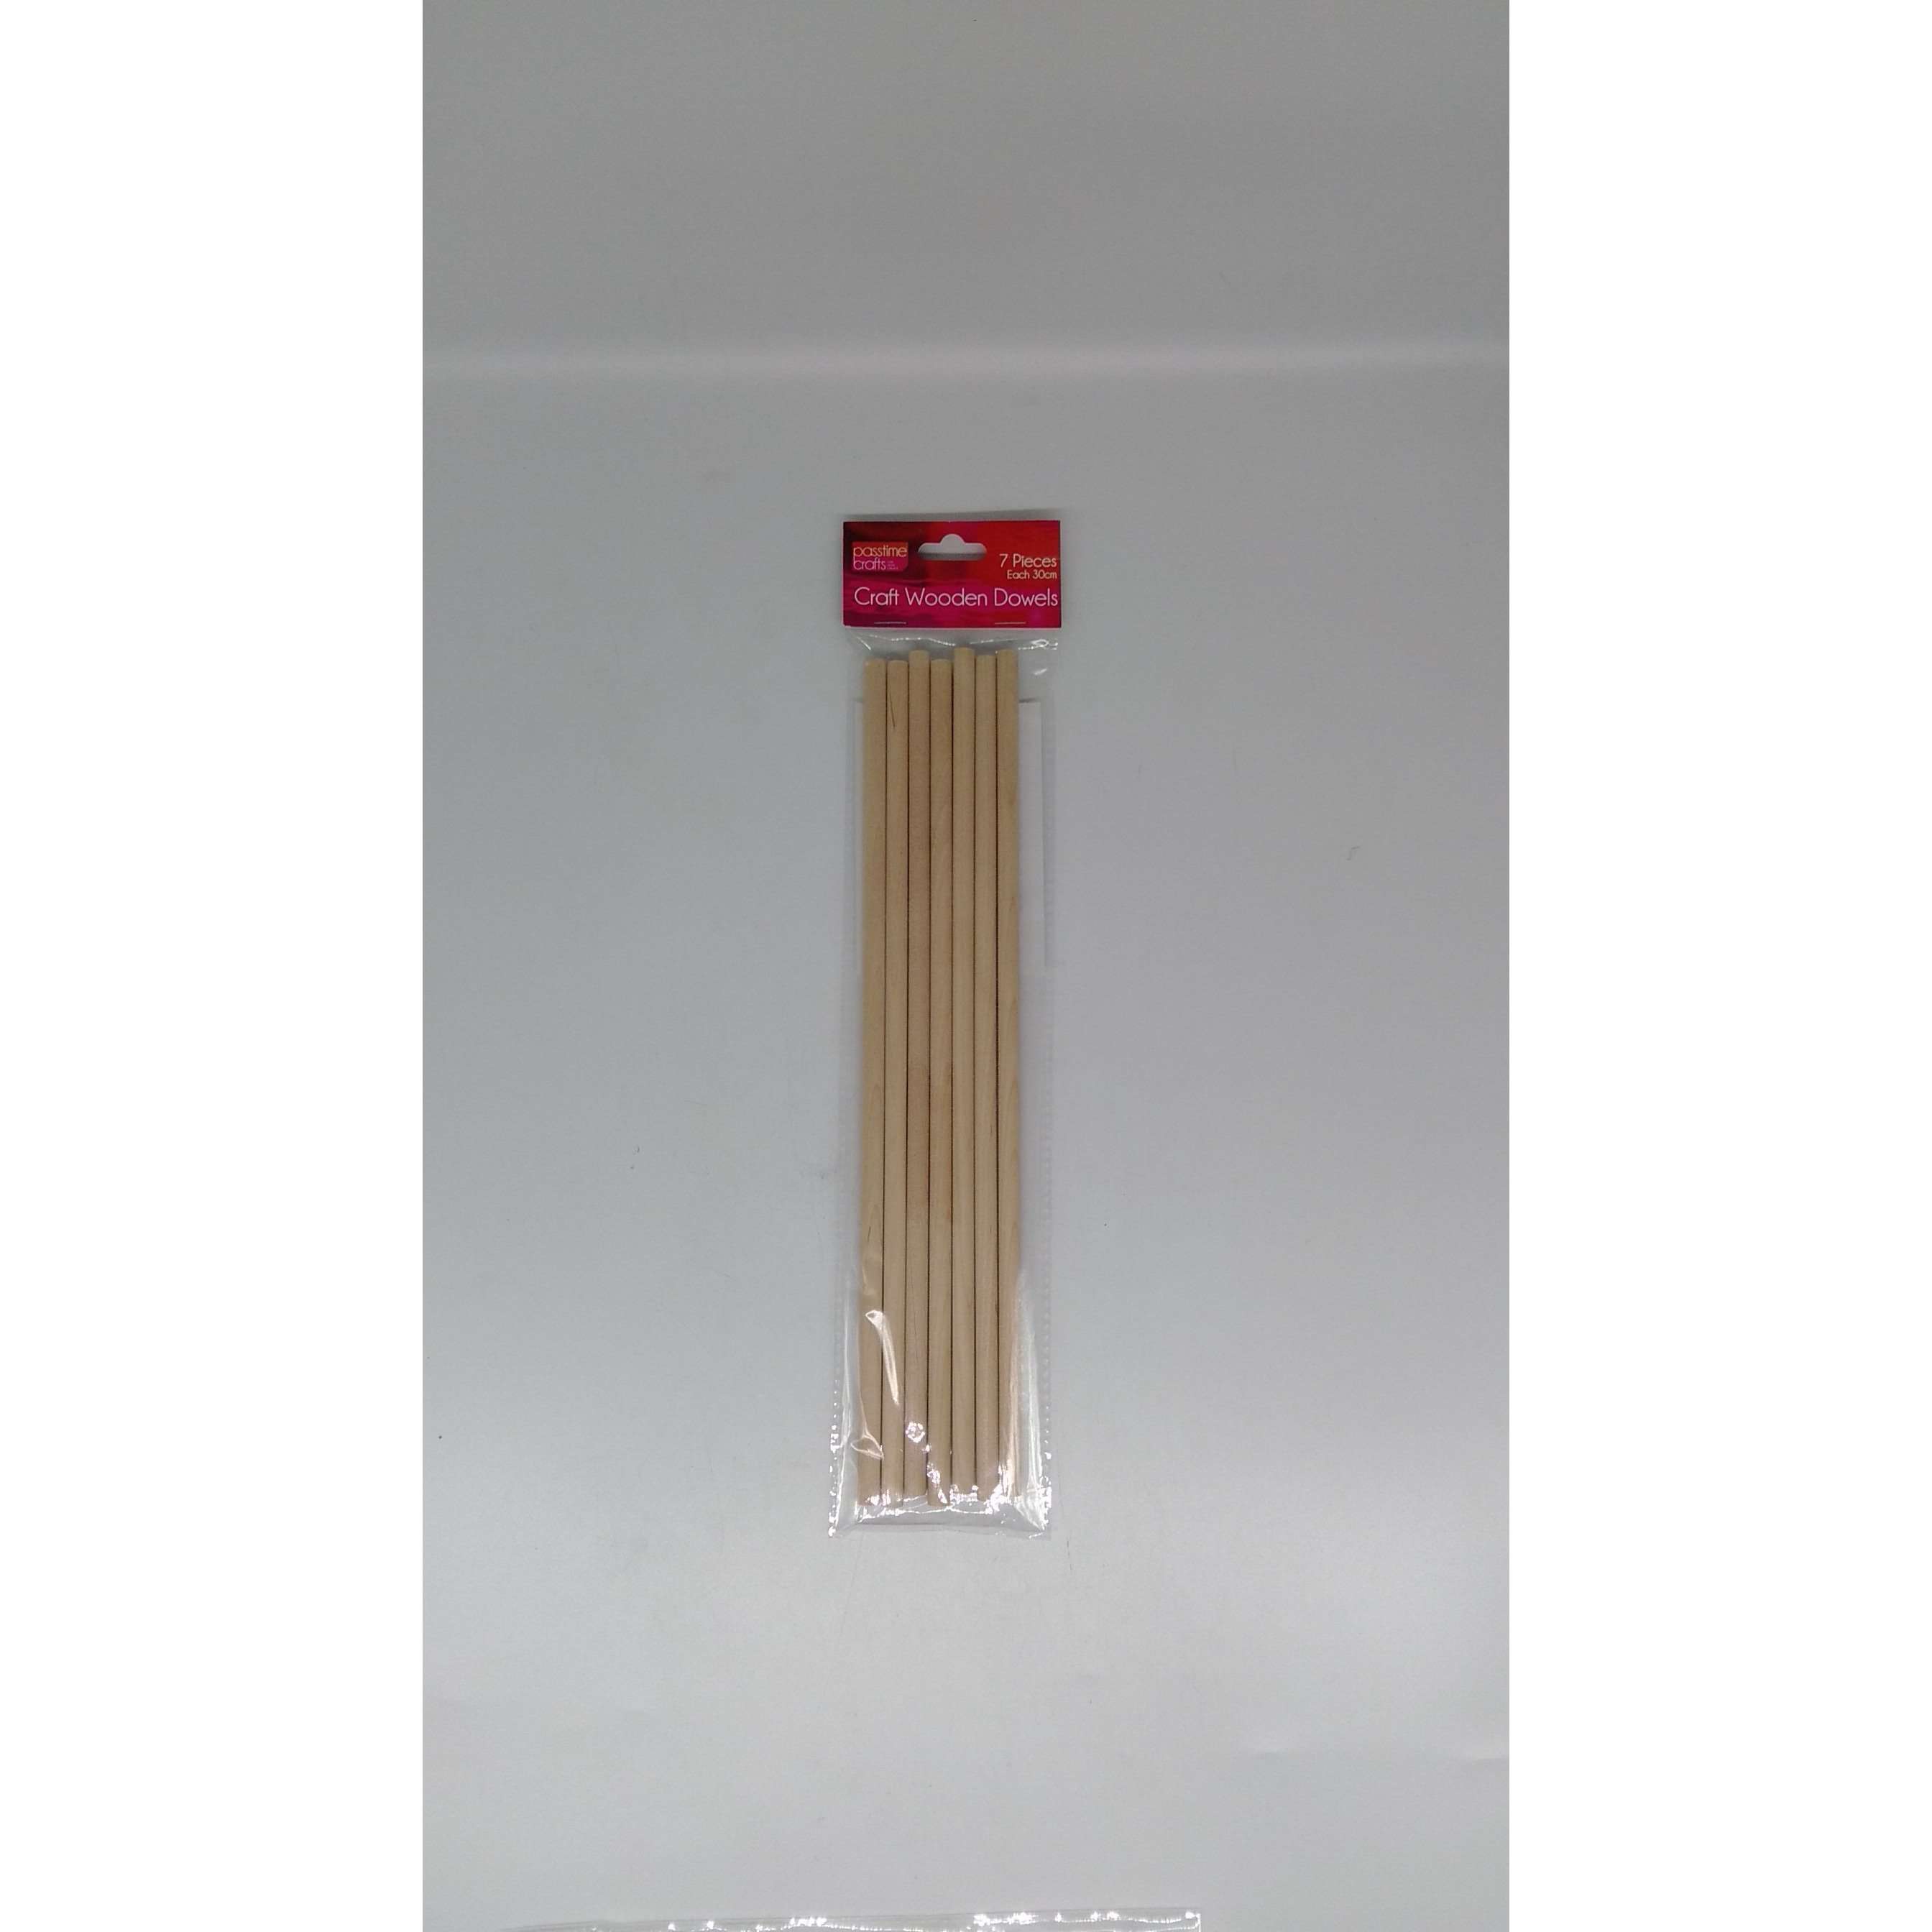 Buy onilne Mont Marte Craft Wood Dowels 30cm 7 Pack | Dollars and Sense cheap and low prices in australia